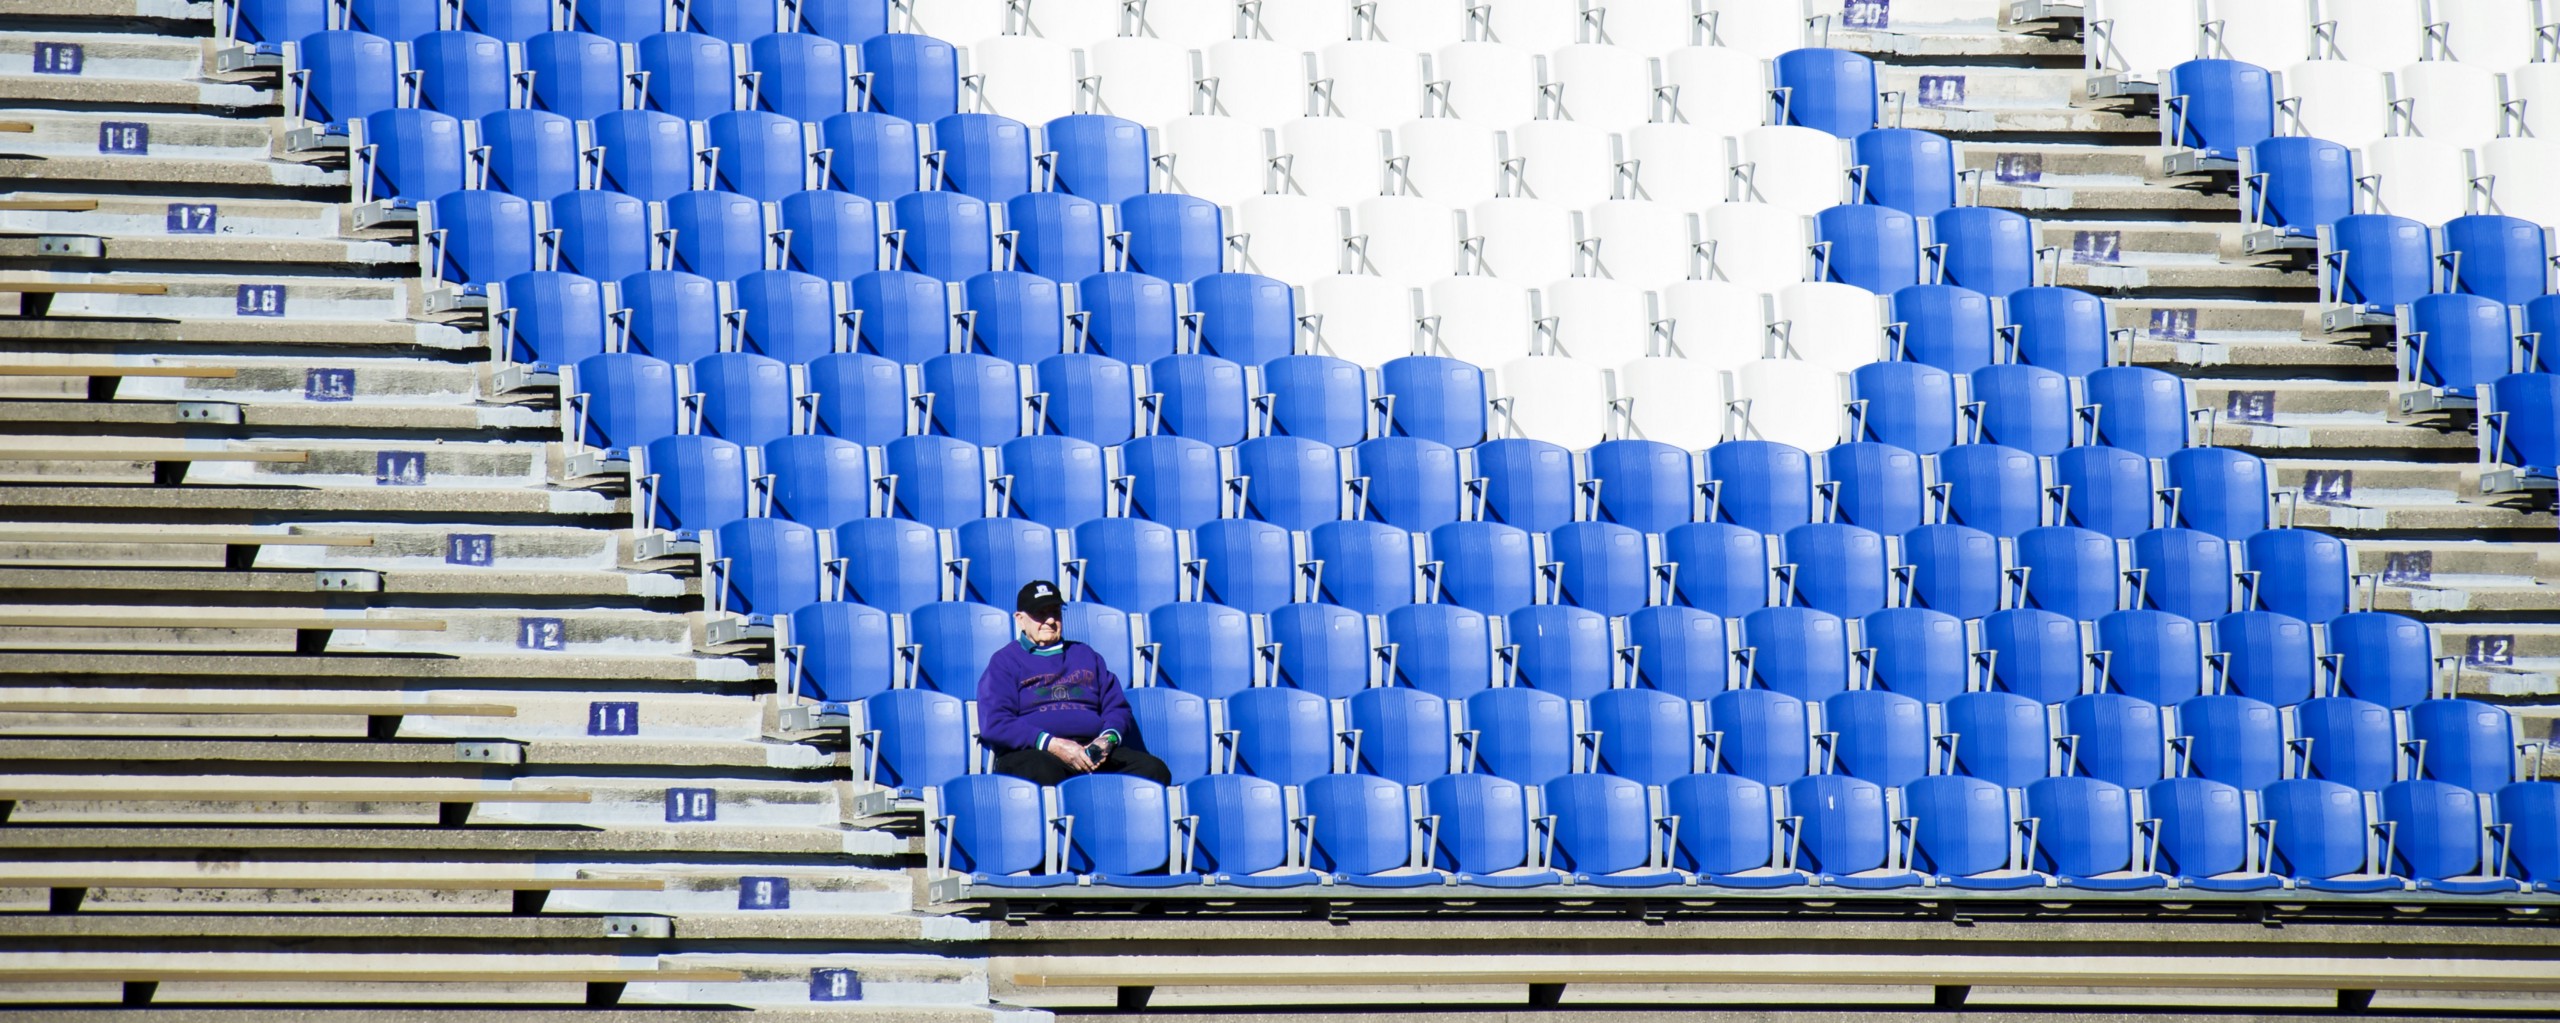 A man sits alone in his seat in an empty sports stadium.